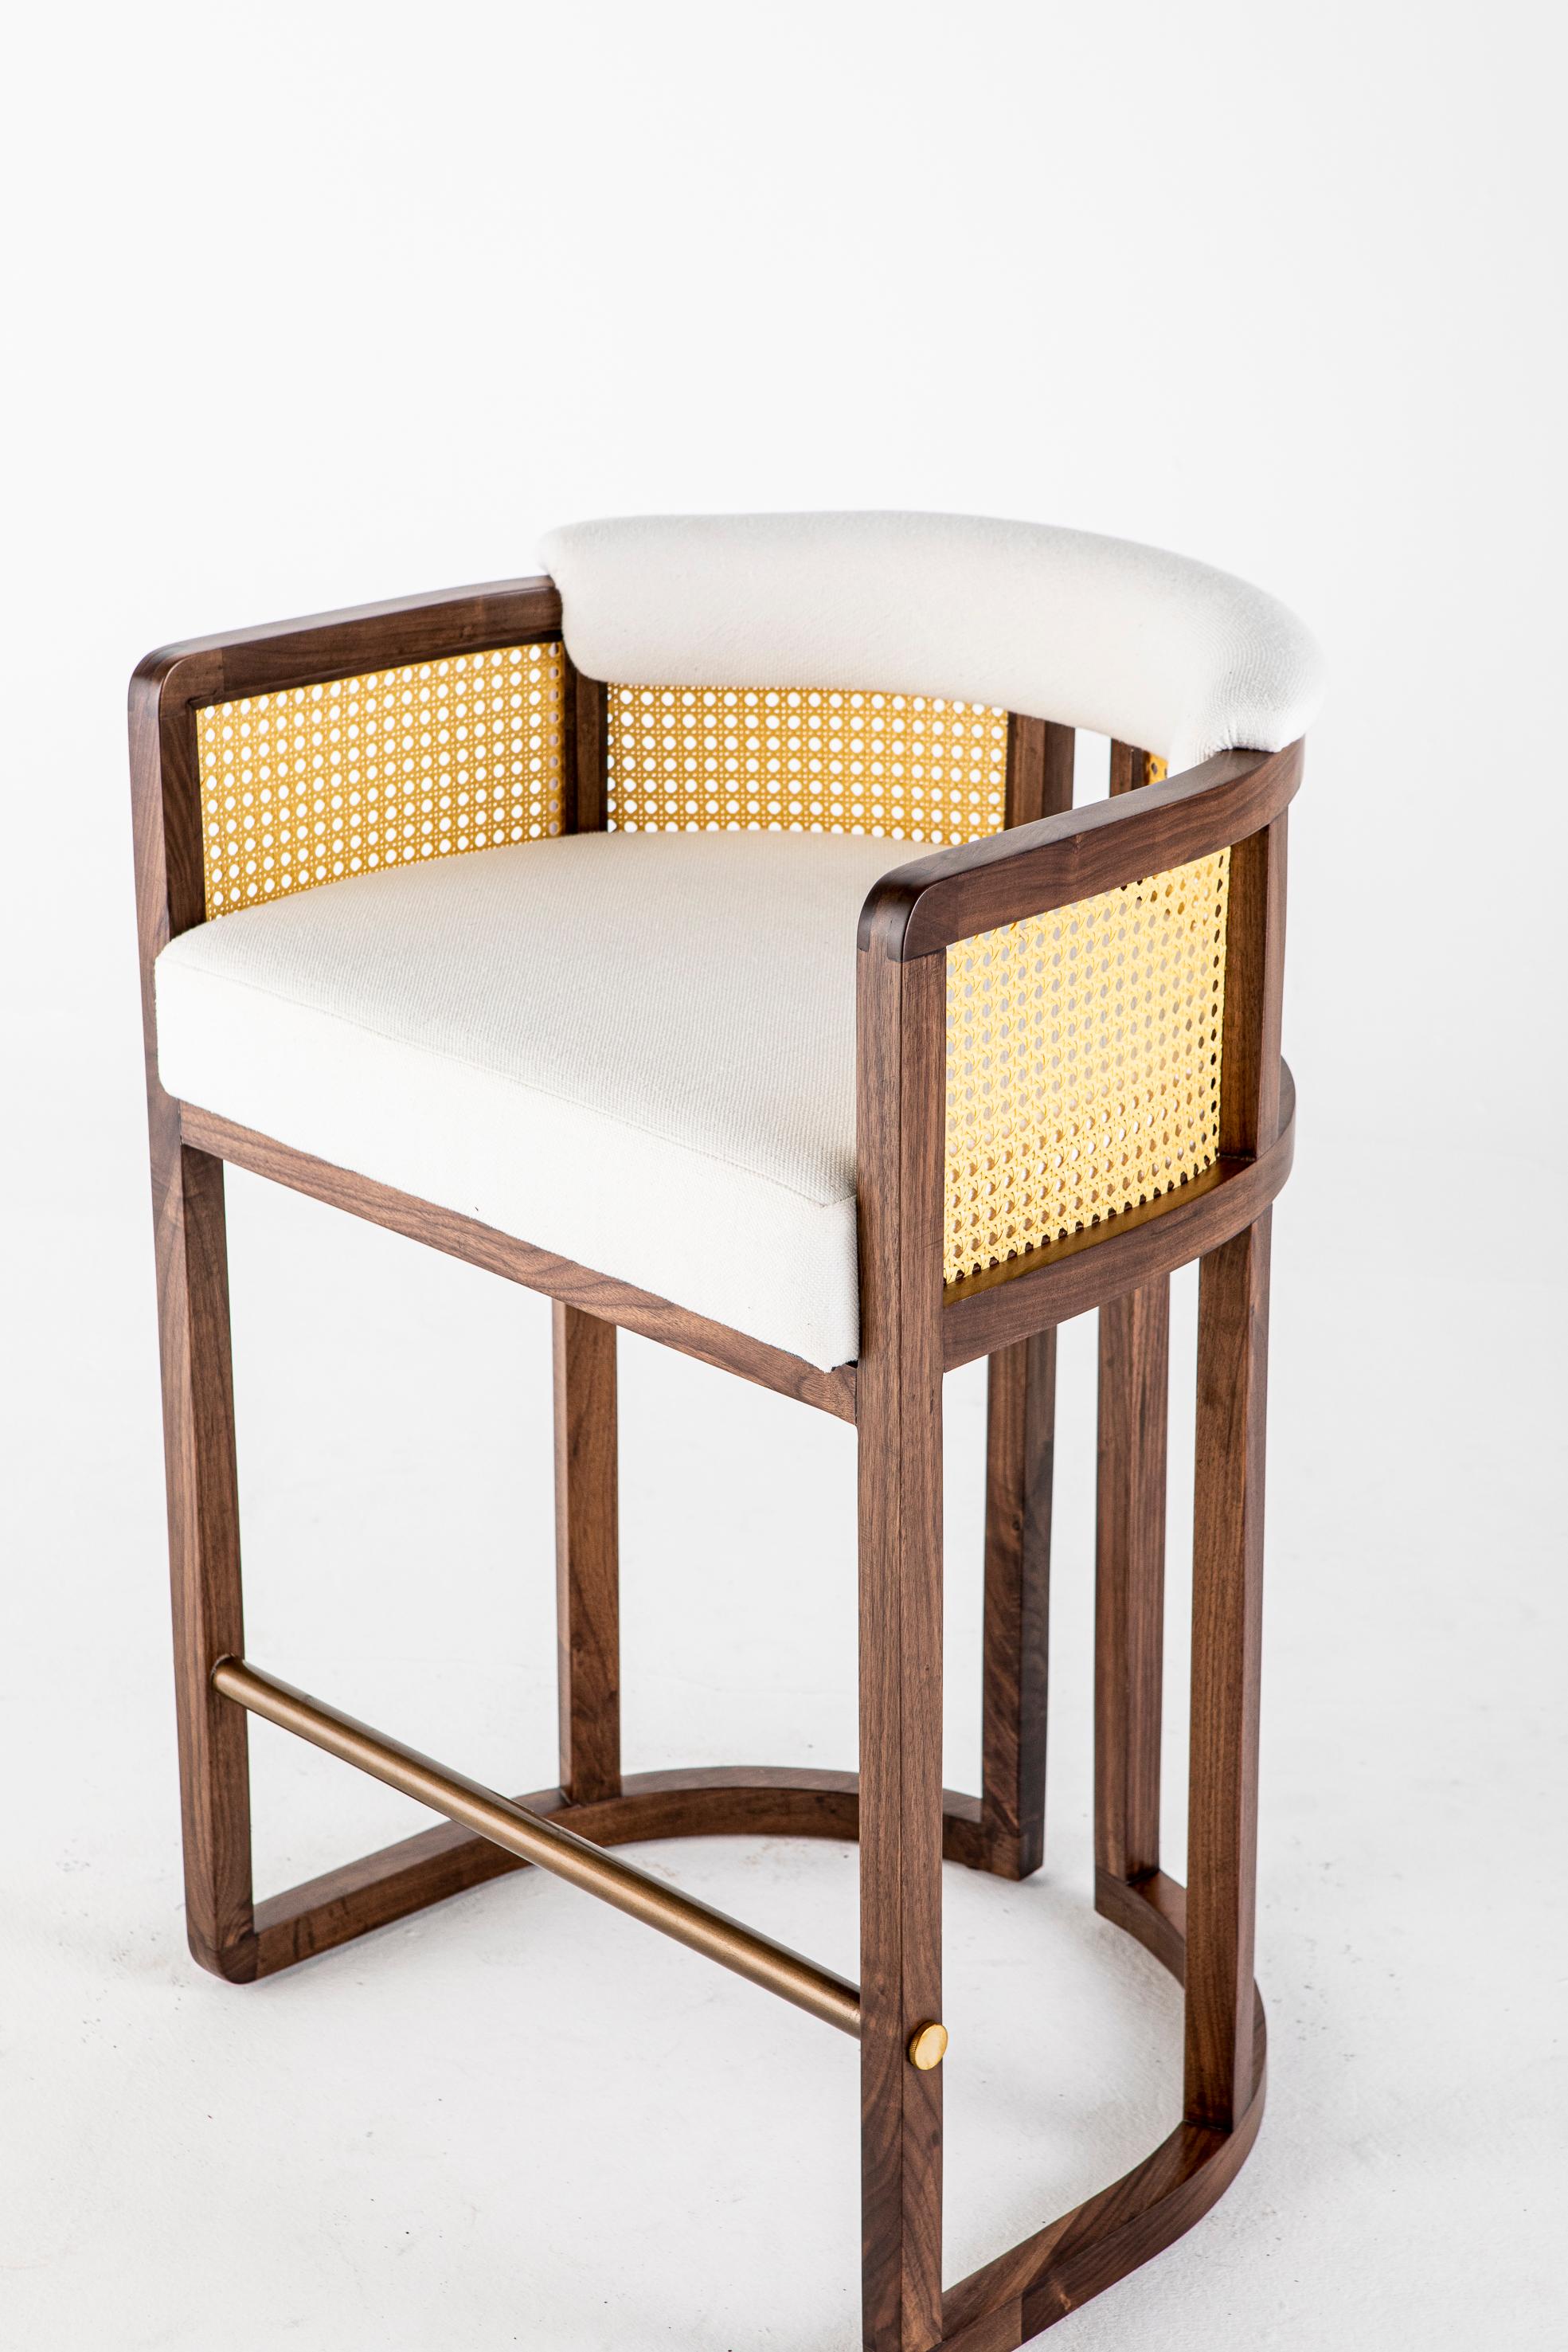 Livingston bar stool by Egg Designs.
Dimensions: 62 L X 49 D X 90 H cm
Materials: walnut timber, synthetic rattan, linen upholstery.

Founded by South Africans and life partners, Greg and Roche Dry - Egg is a unique perspective in contemporary